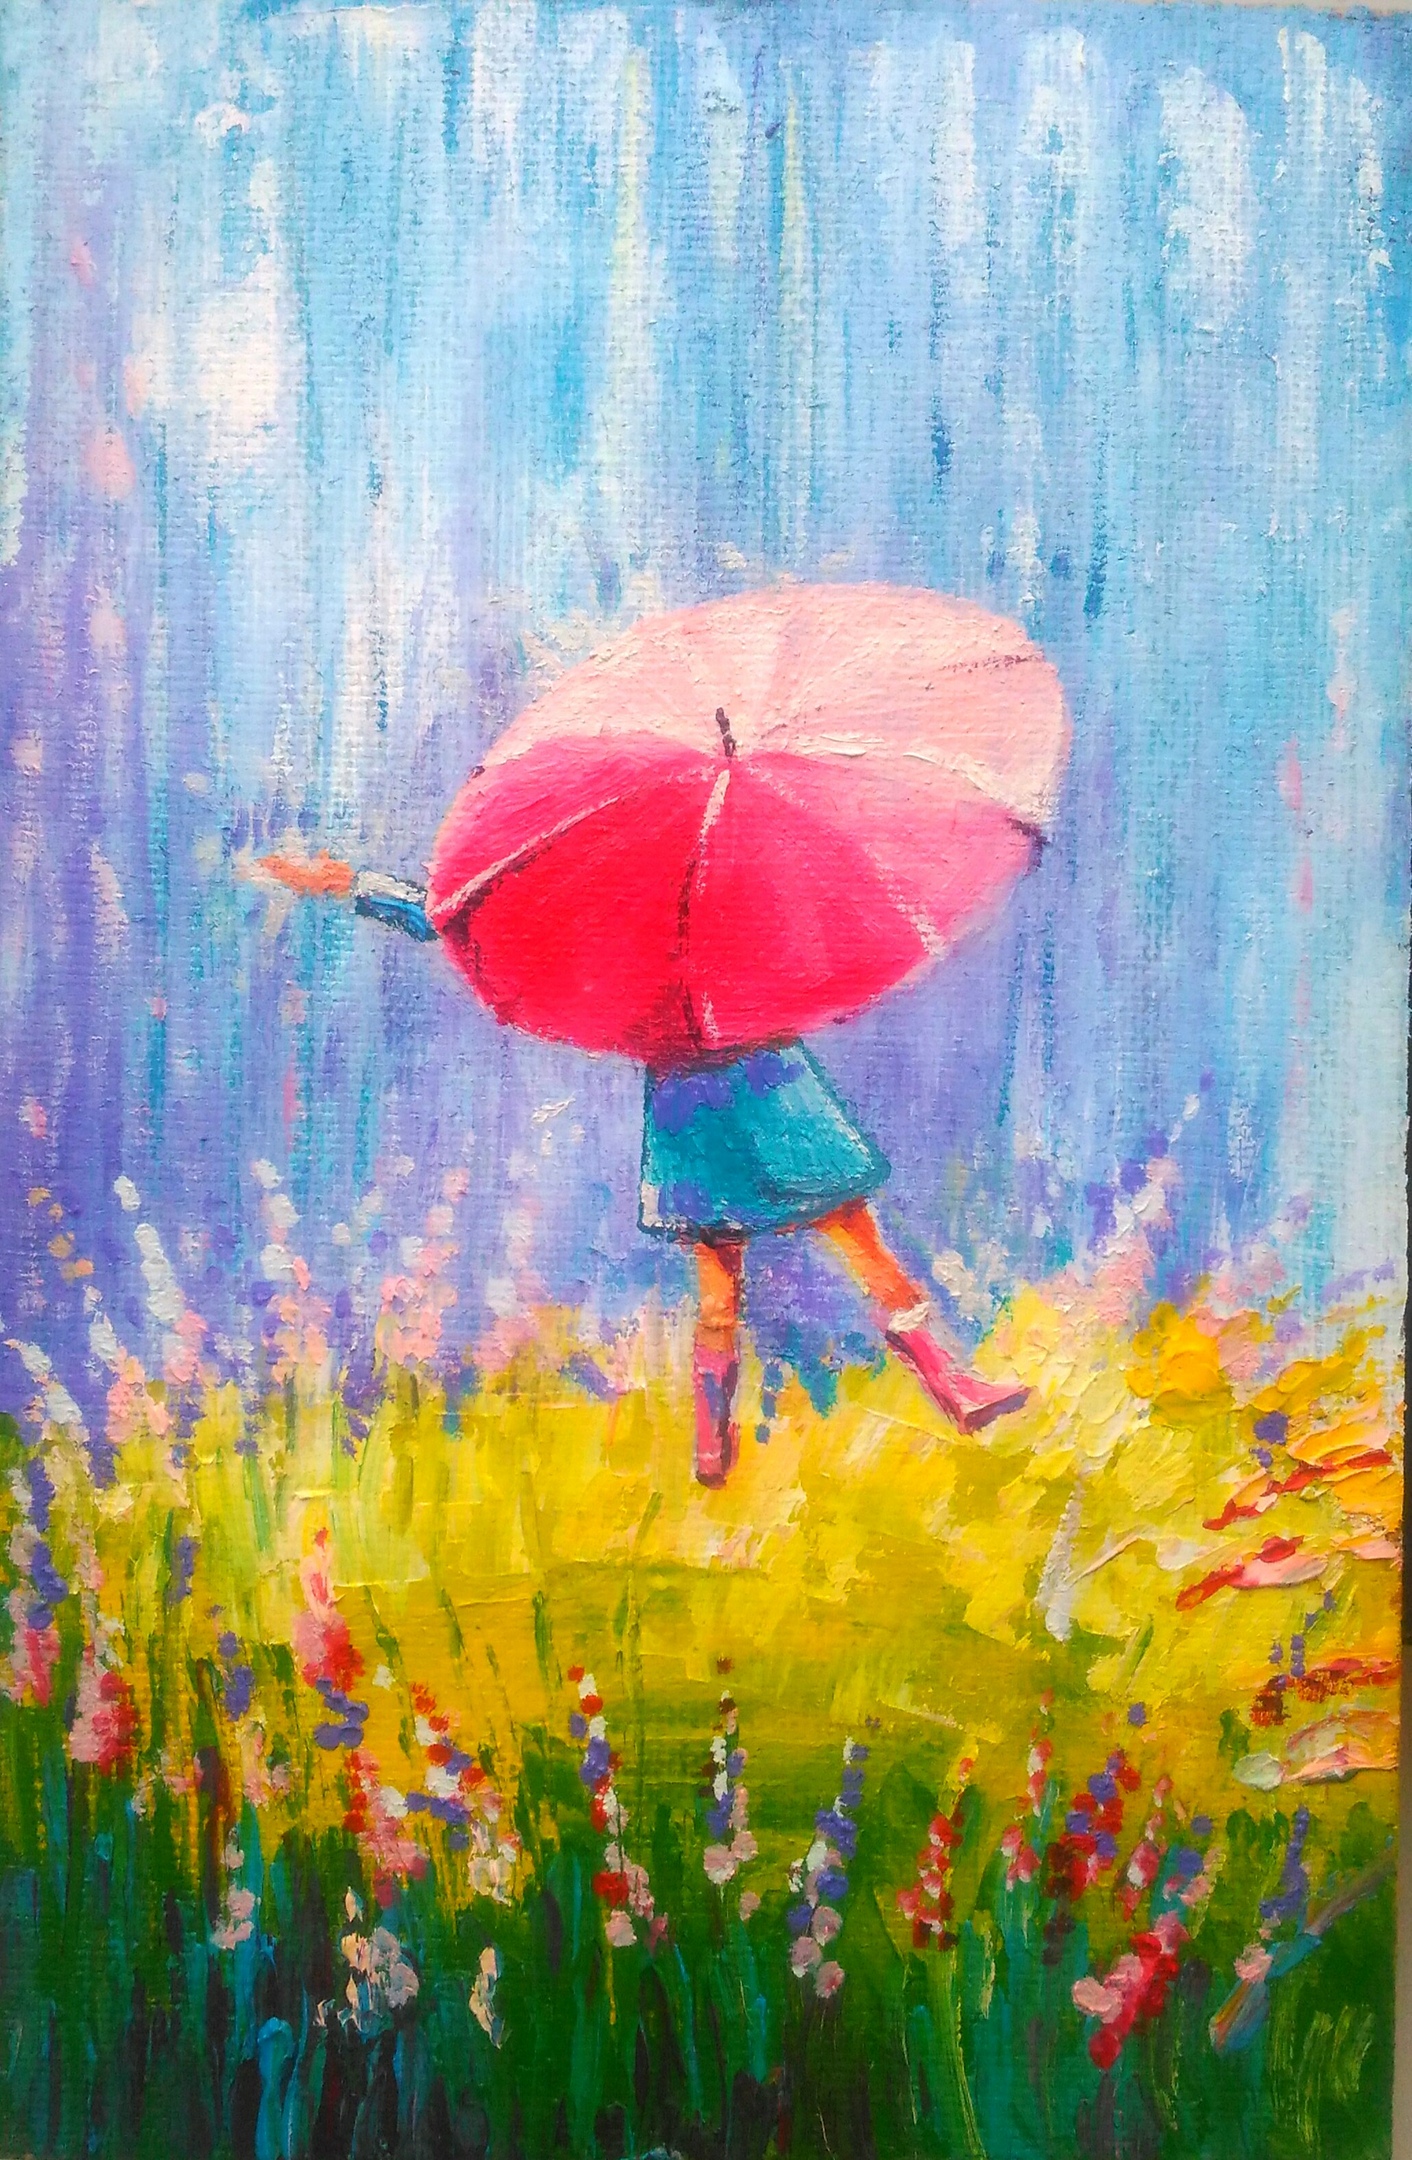 Girl With Umbrella in Rain Painting